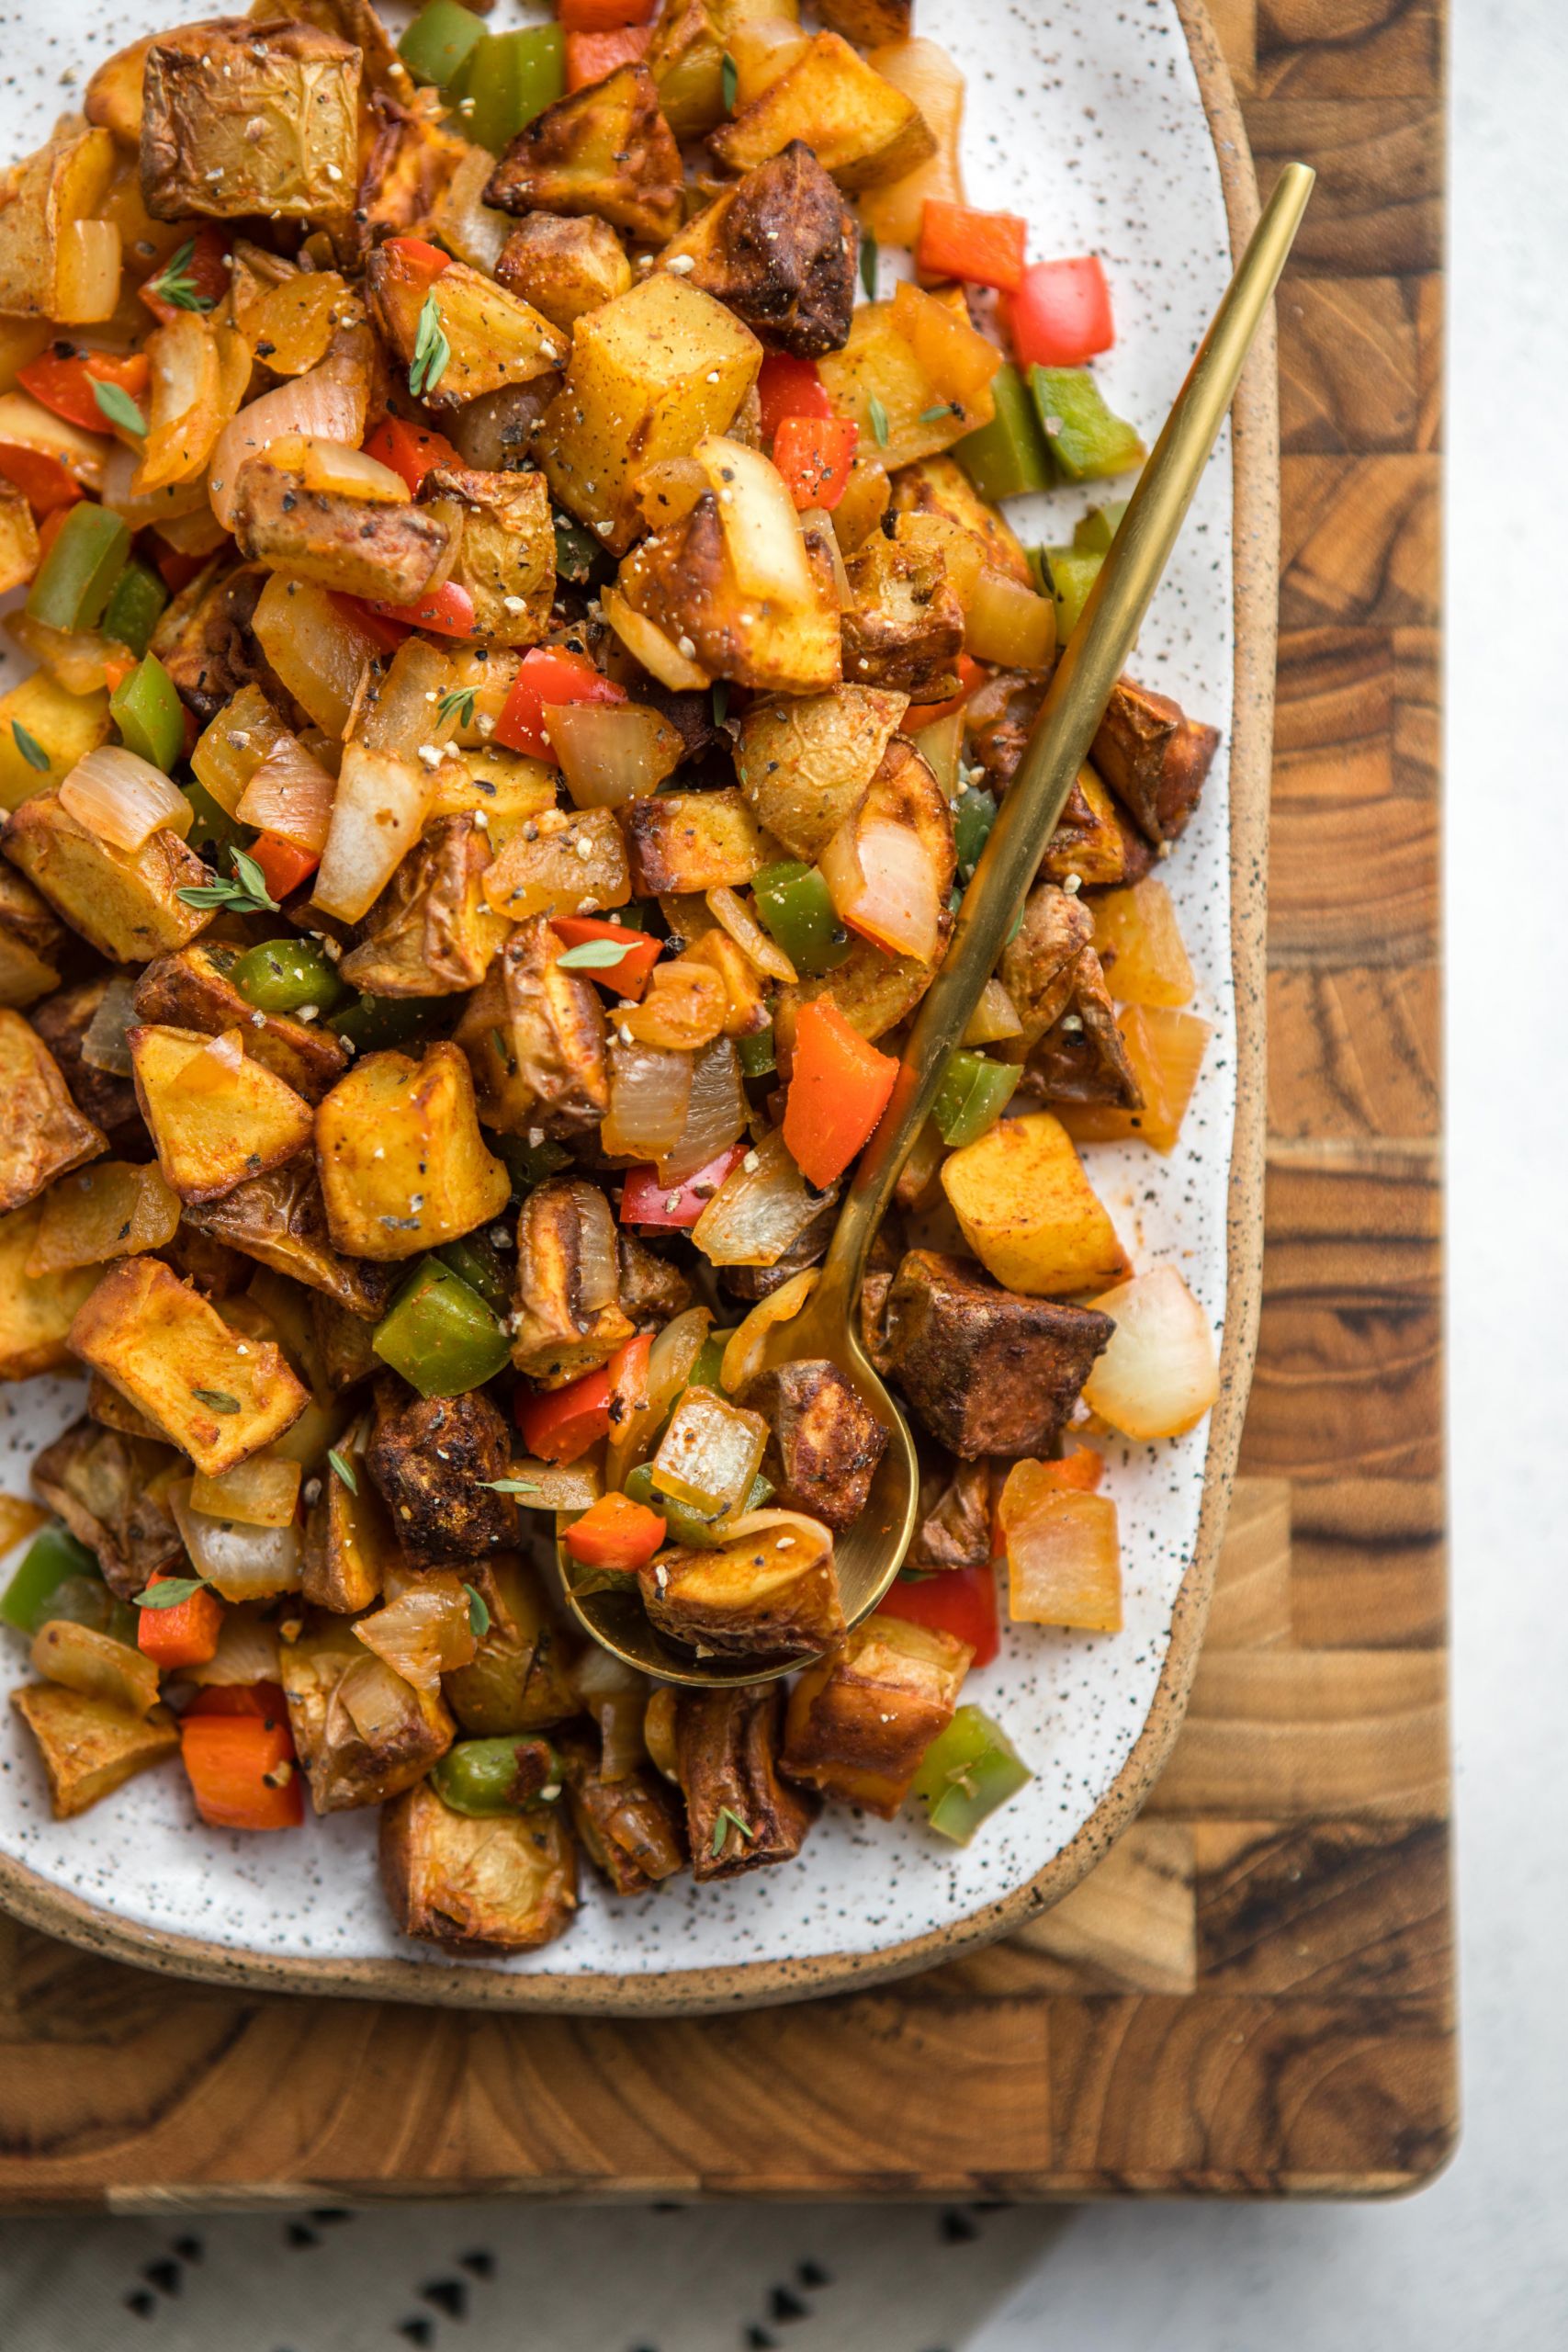 Vegan Breakfast Potatoes
 From My Bowl Page 3 of 27 by Caitlin Shoemaker